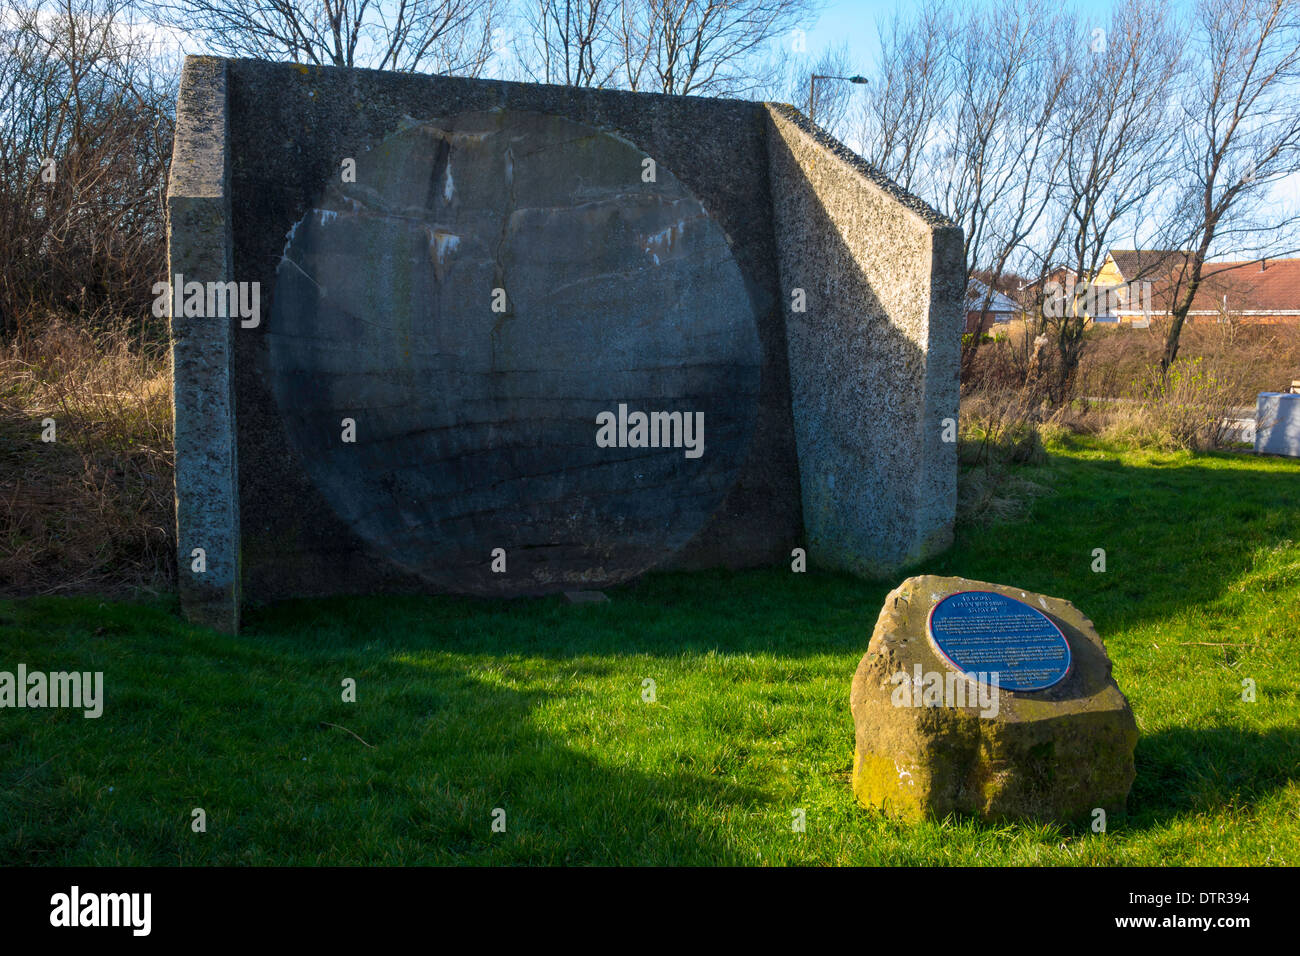 Concrete sound mirror or reflector of the Redcar Early Warning Station built to detect enemy aircraft in the First World War Stock Photo